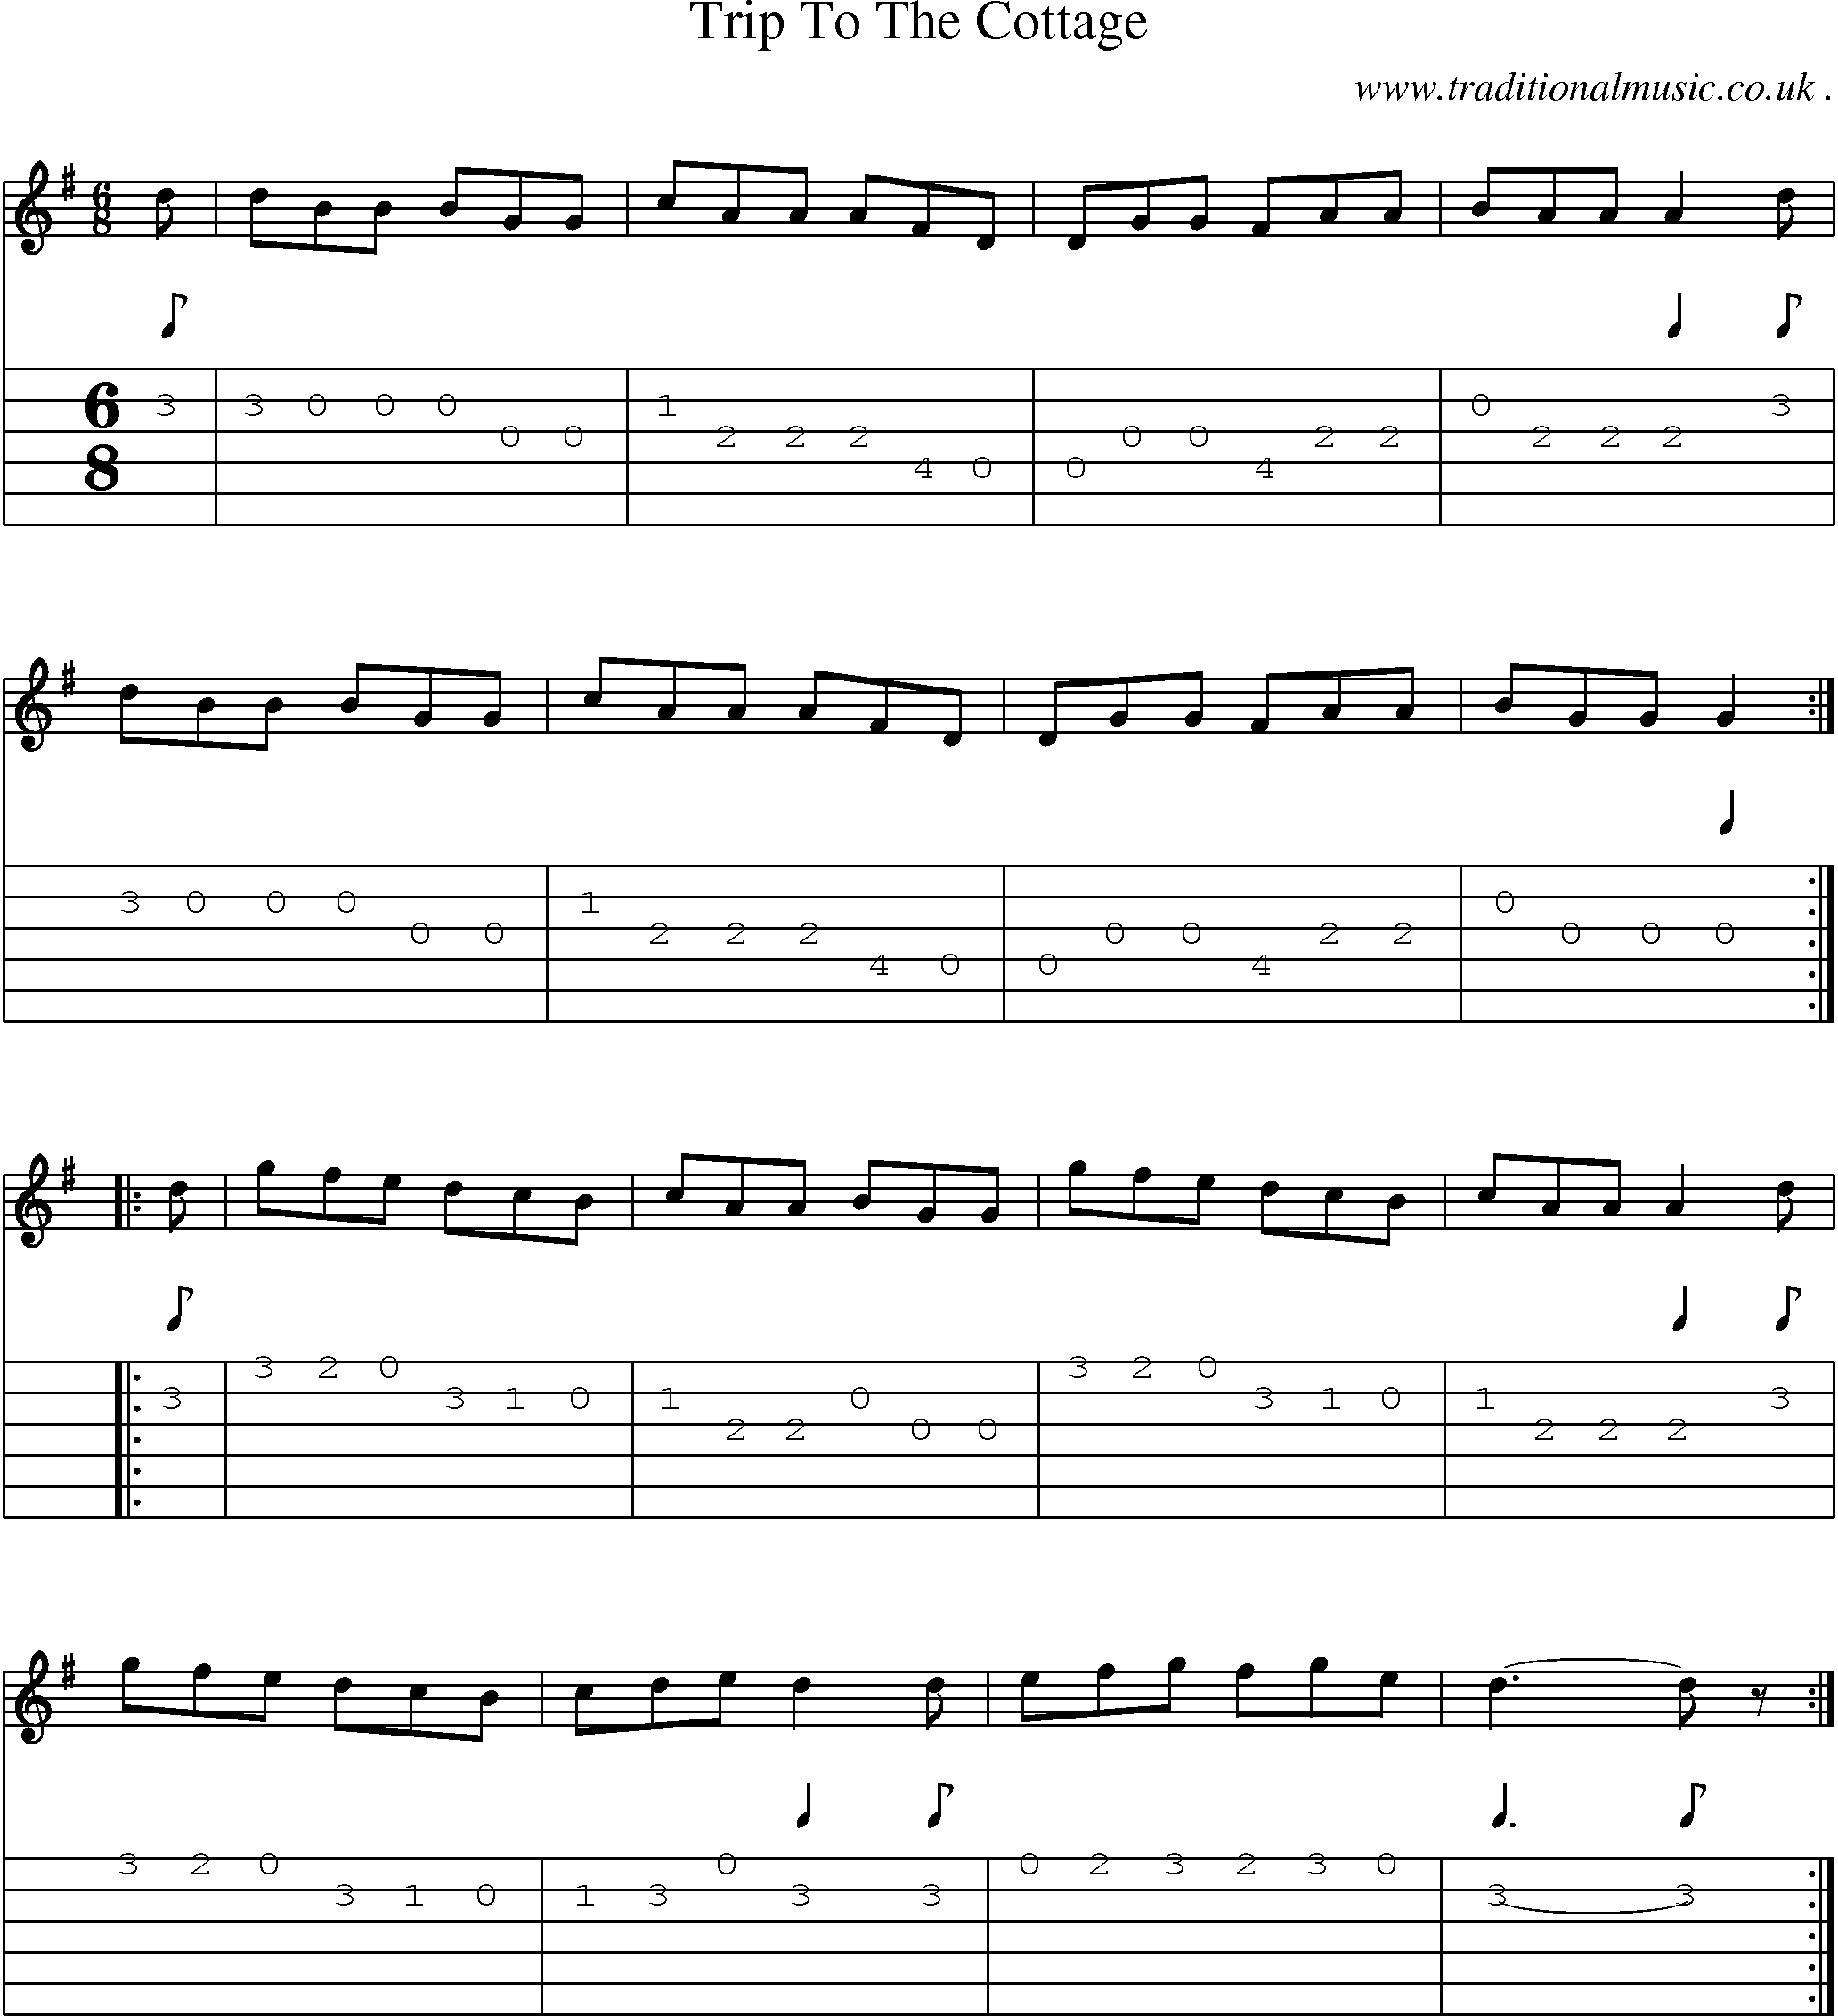 Sheet-Music and Guitar Tabs for Trip To The Cottage